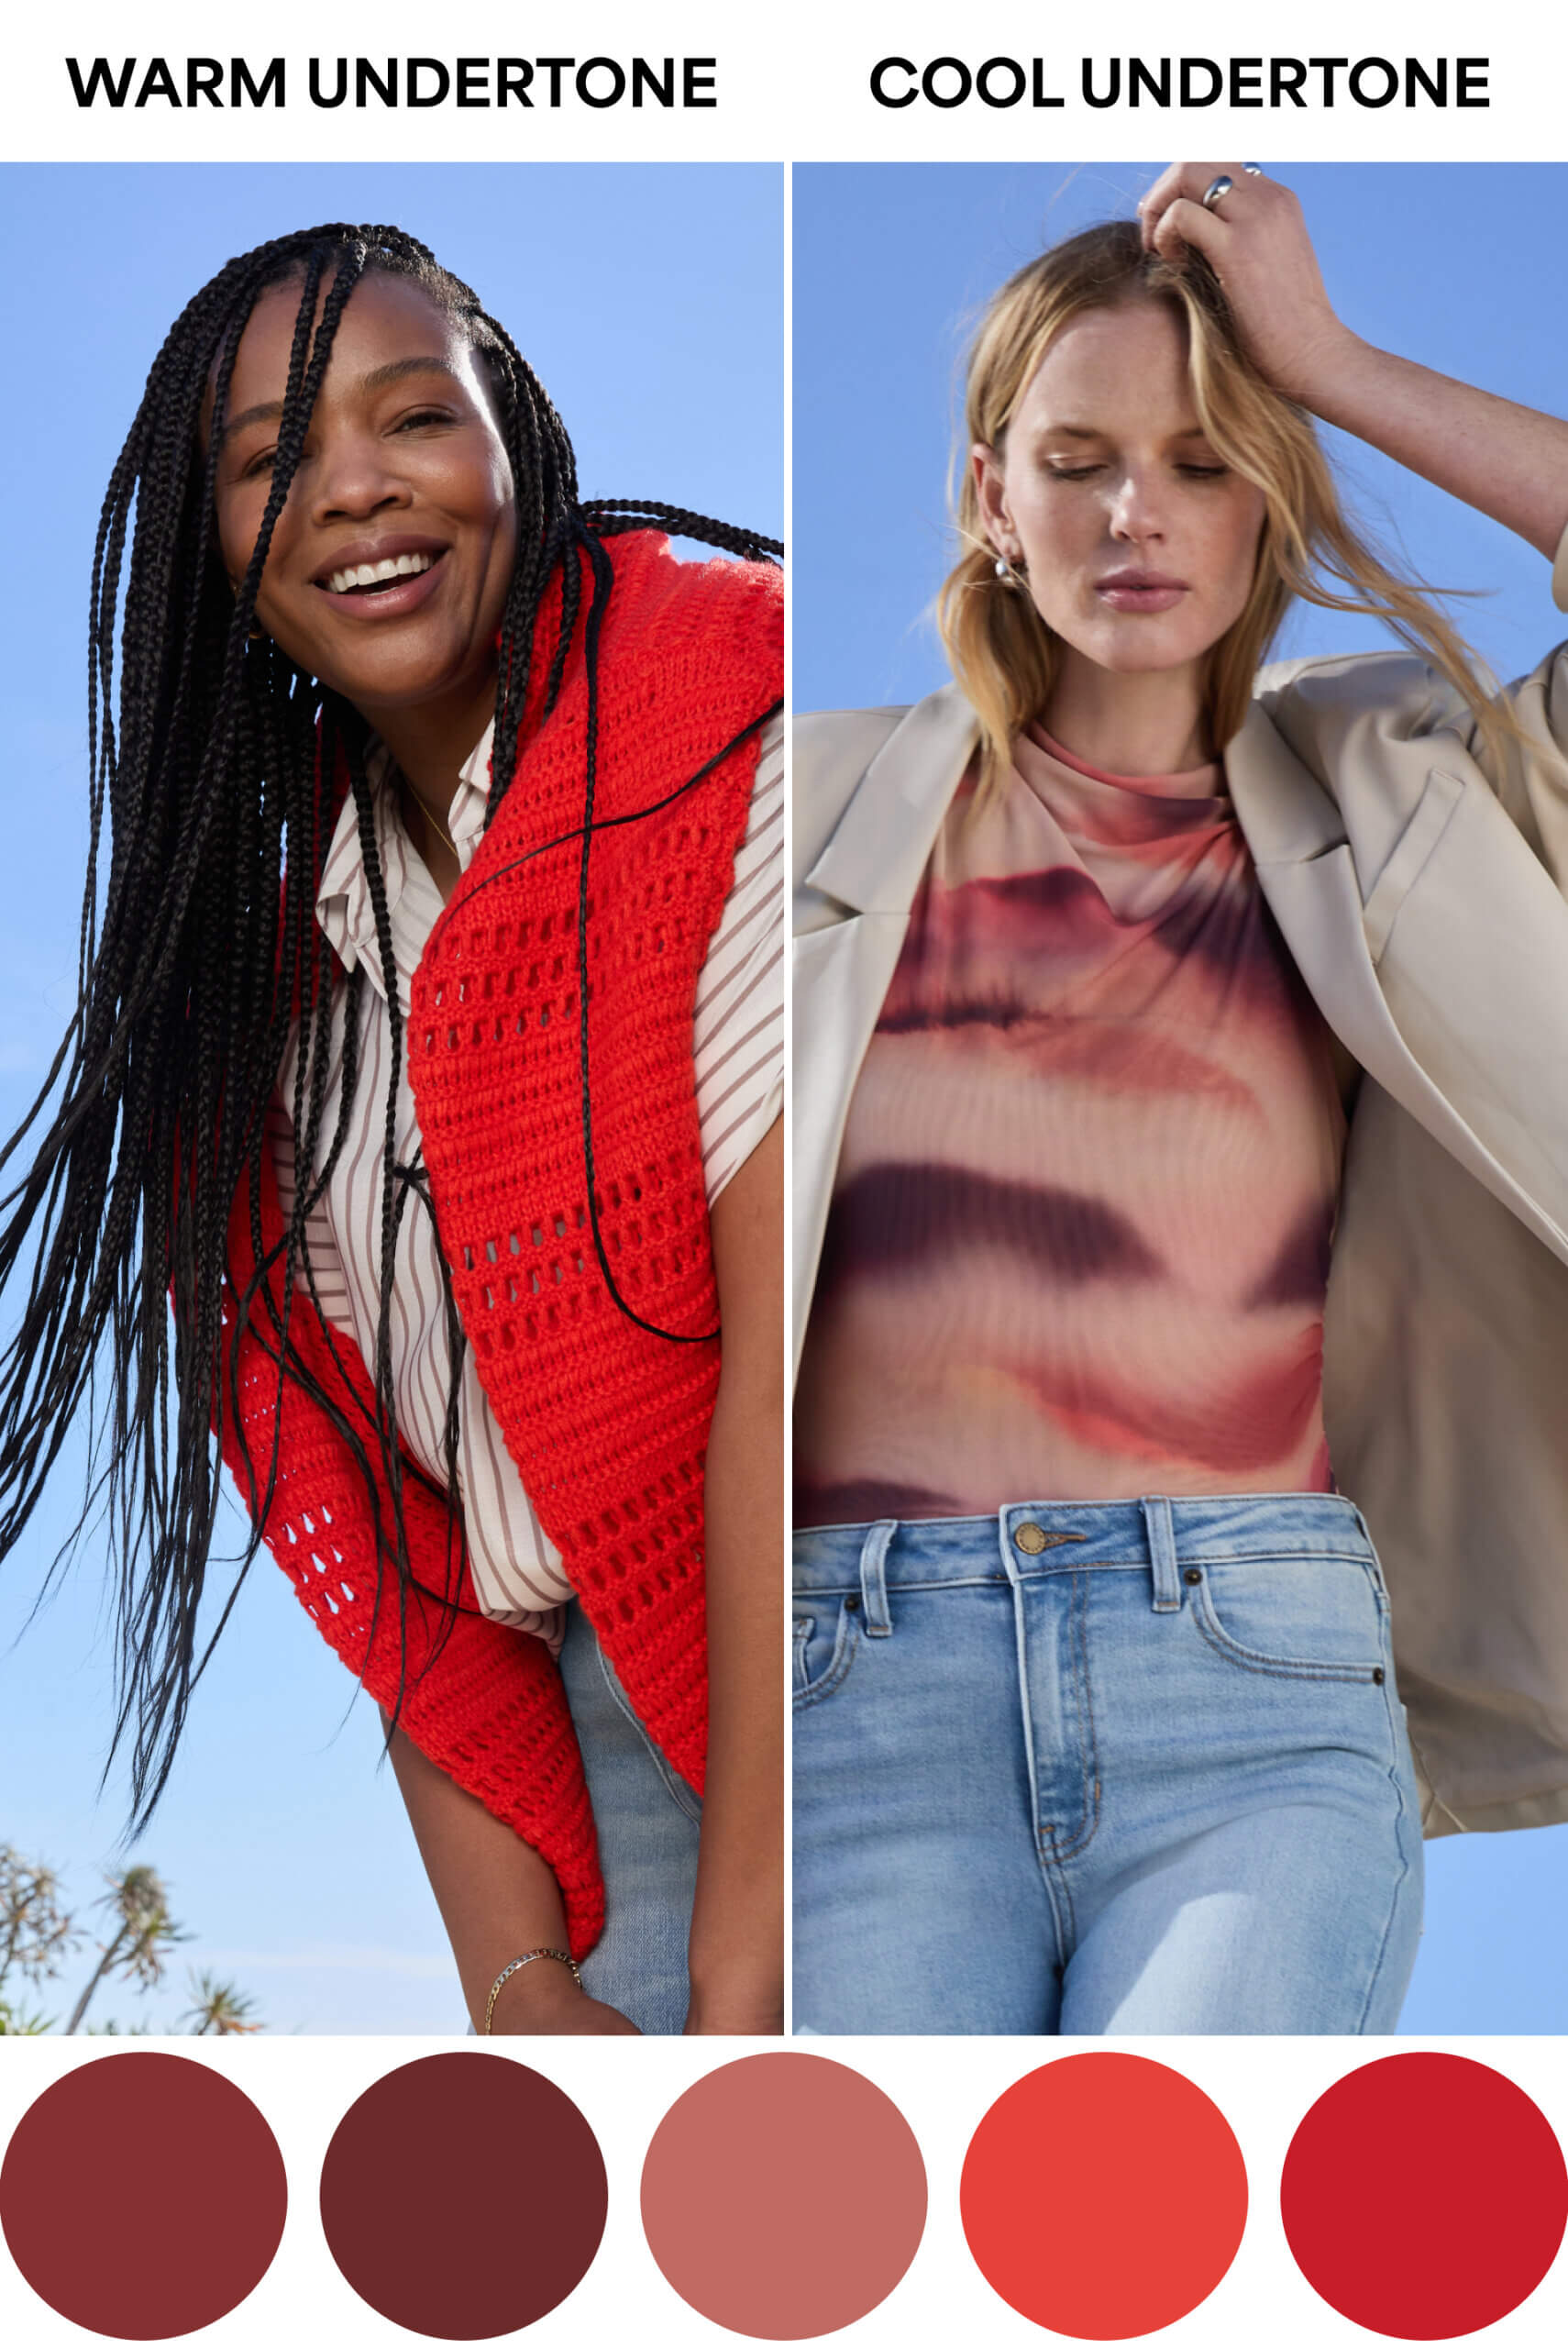 On the left, a dark-skinned woman with brown hair wearing a floral skirt and burgundy sweater and jacket. On the right, a light-skinned woman with blonde hair wearing olive pants and a red hoodie. Below them, five circles in shades of red.